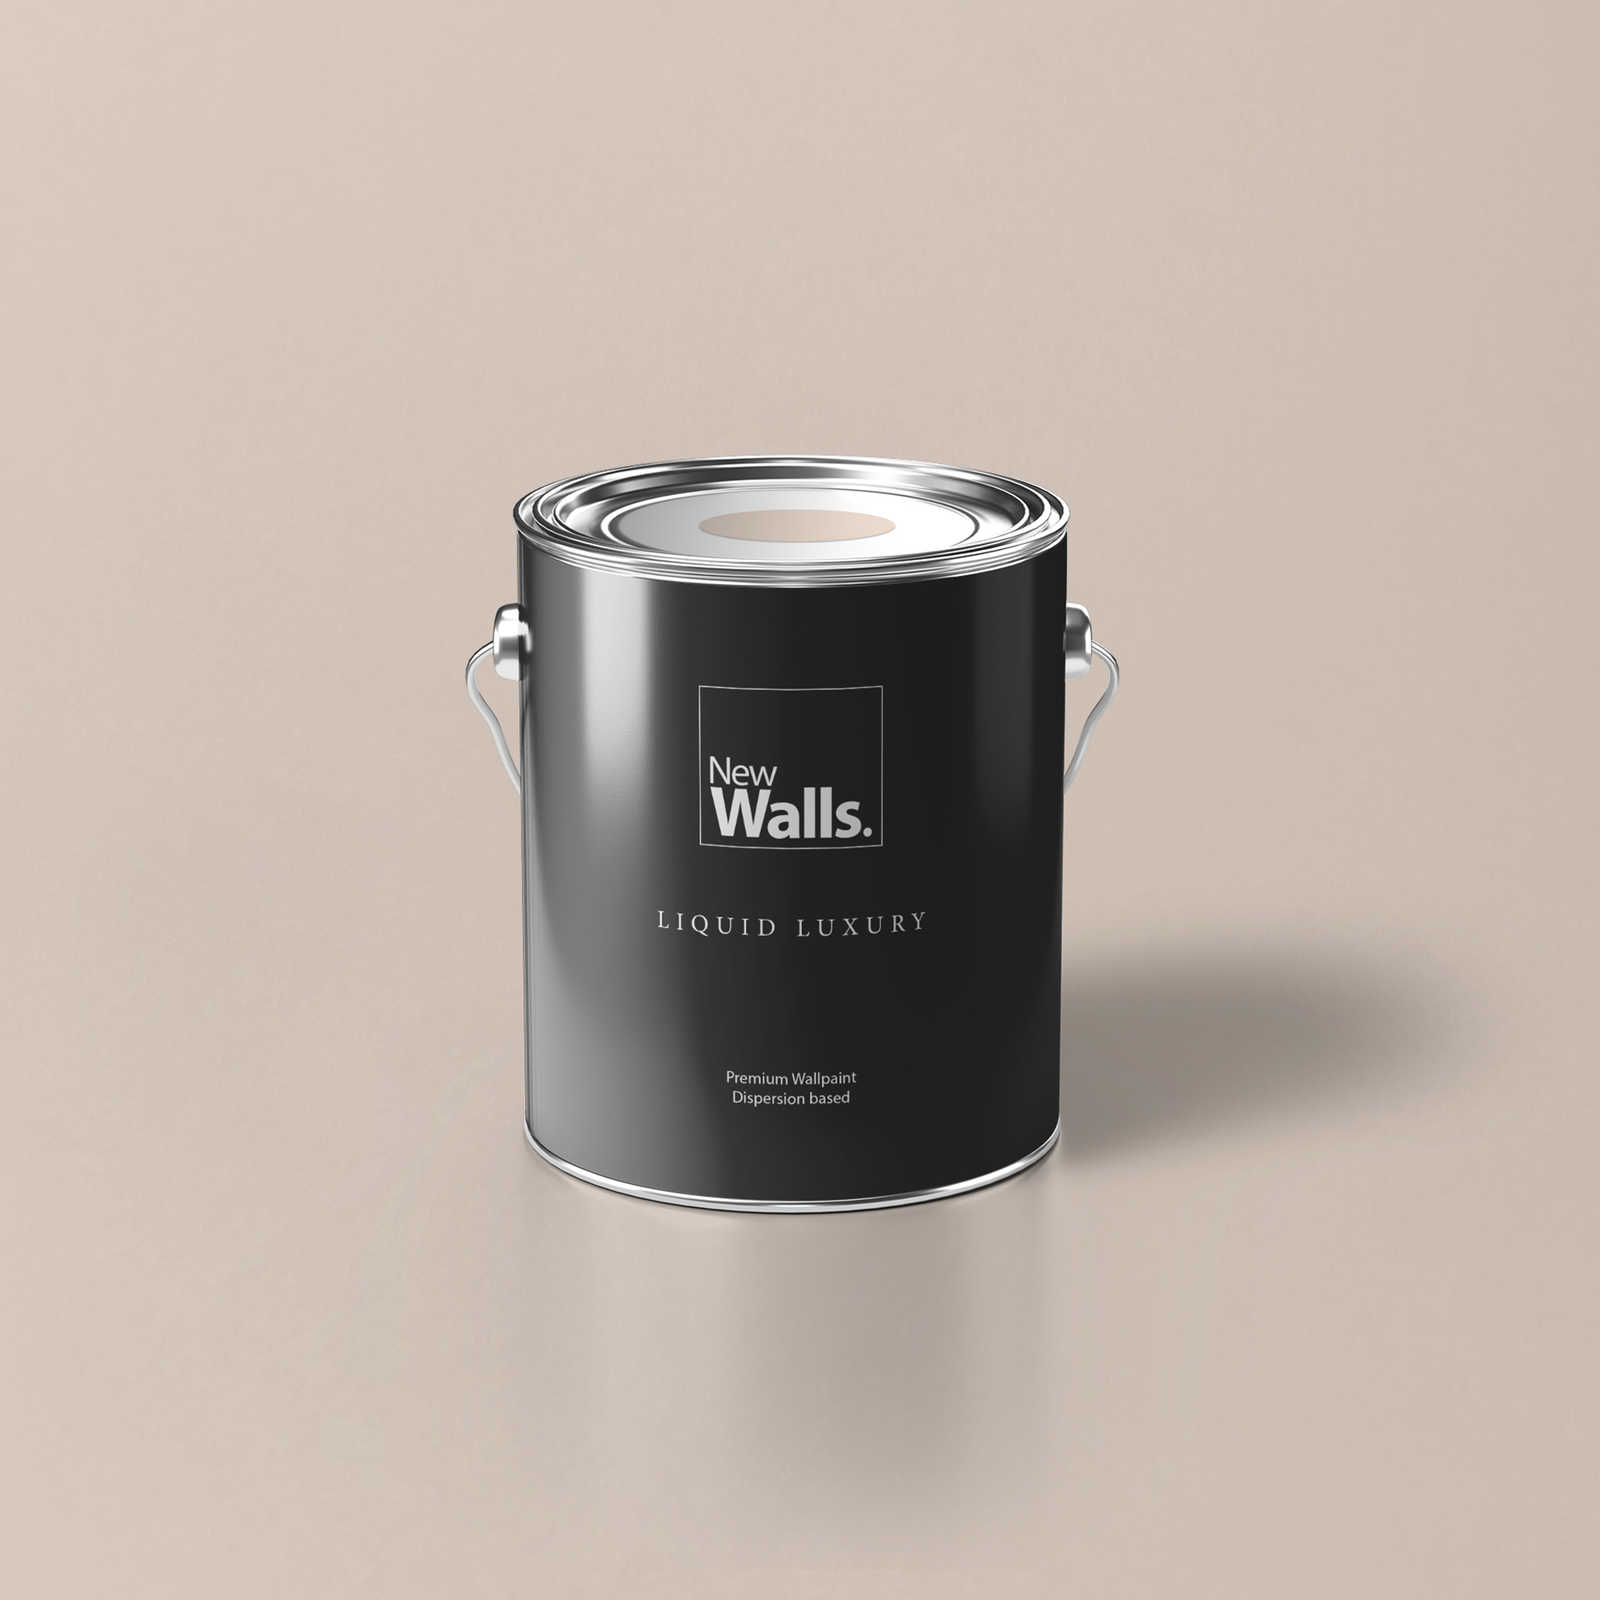 Premium Wall Paint Soothing Sand »Active Apricot« NW910 – 2.5 litre
